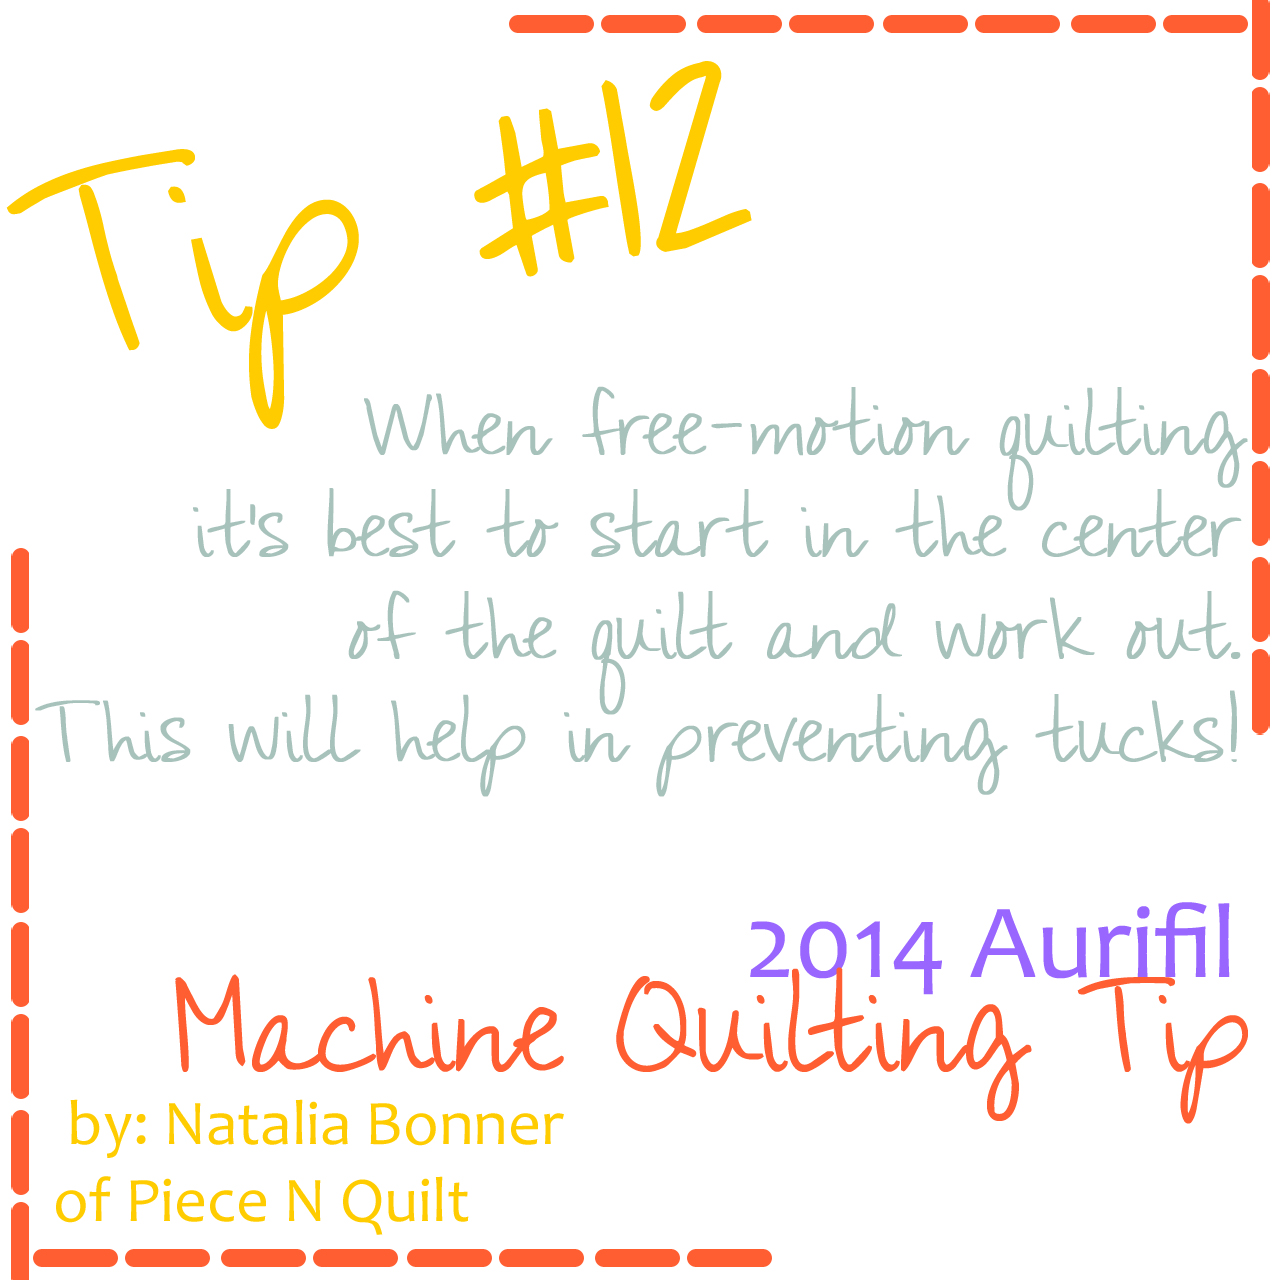 machine quilting tip for aurifil number 12